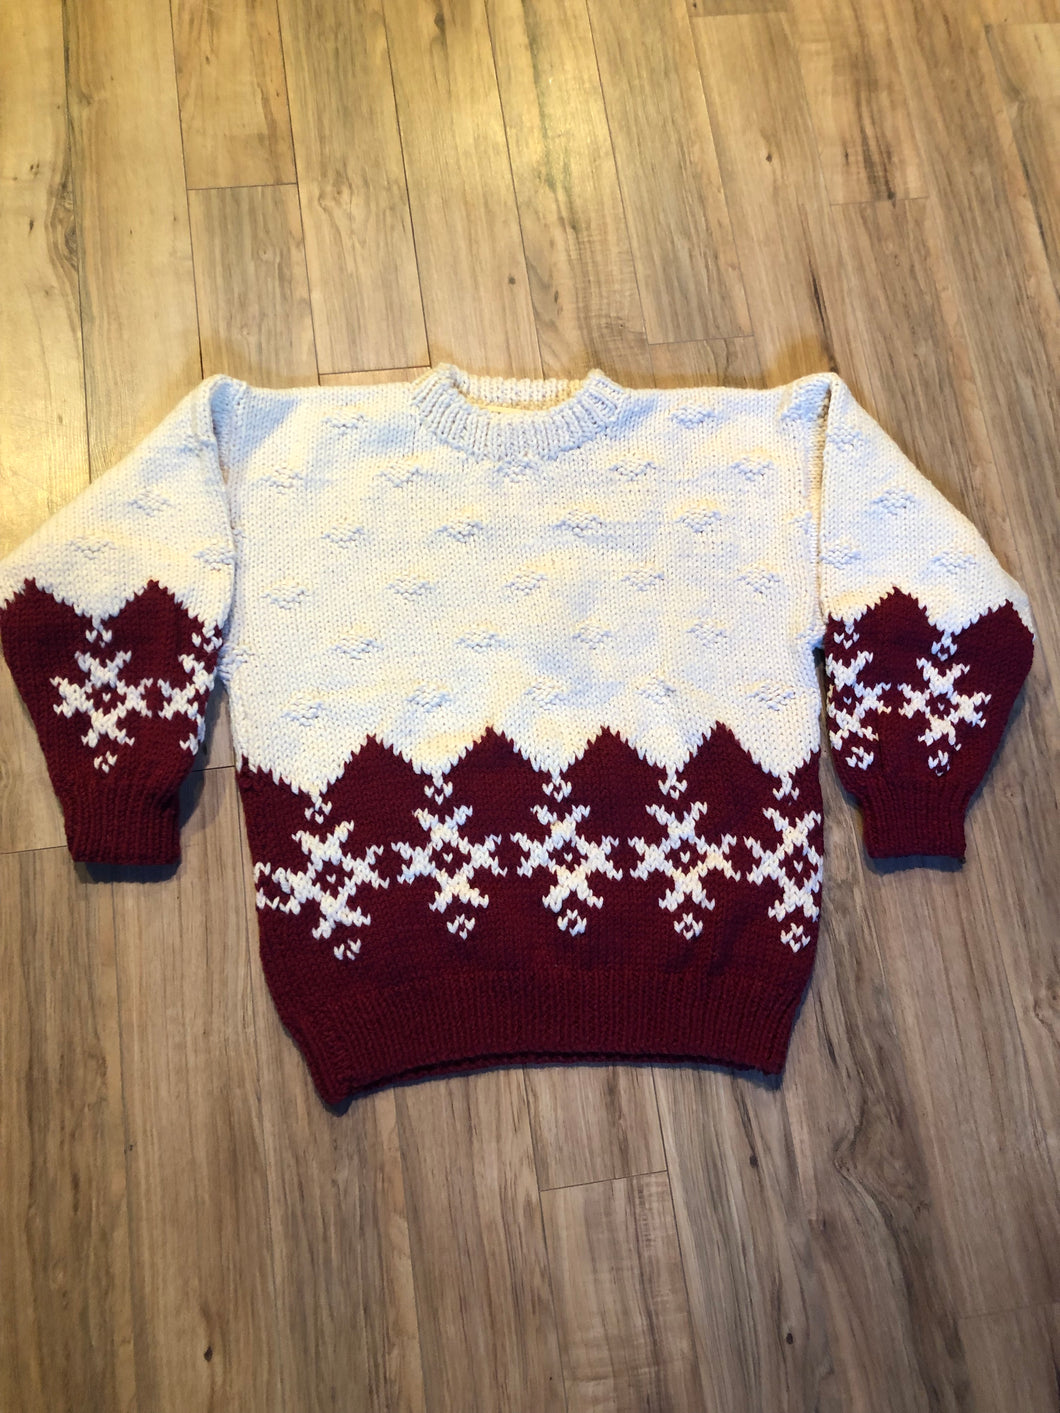 Kingspier Vintage - Vintage hand-knit crewneck sweater with a unique cream and burgundy pattern. 

Made in Nova Scotia, Canada.
Size large.